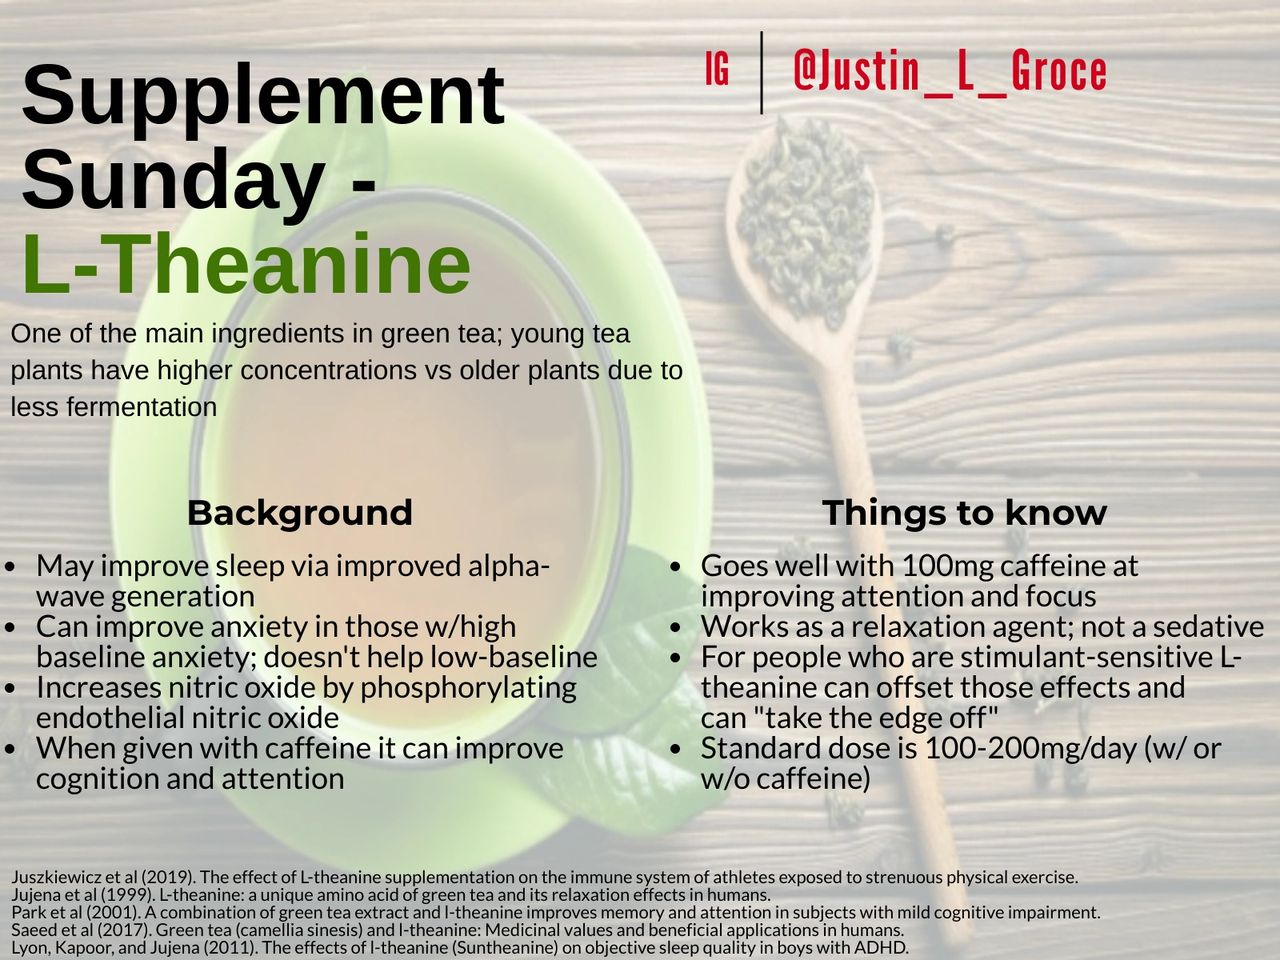 Is Theanine a Stimulant?